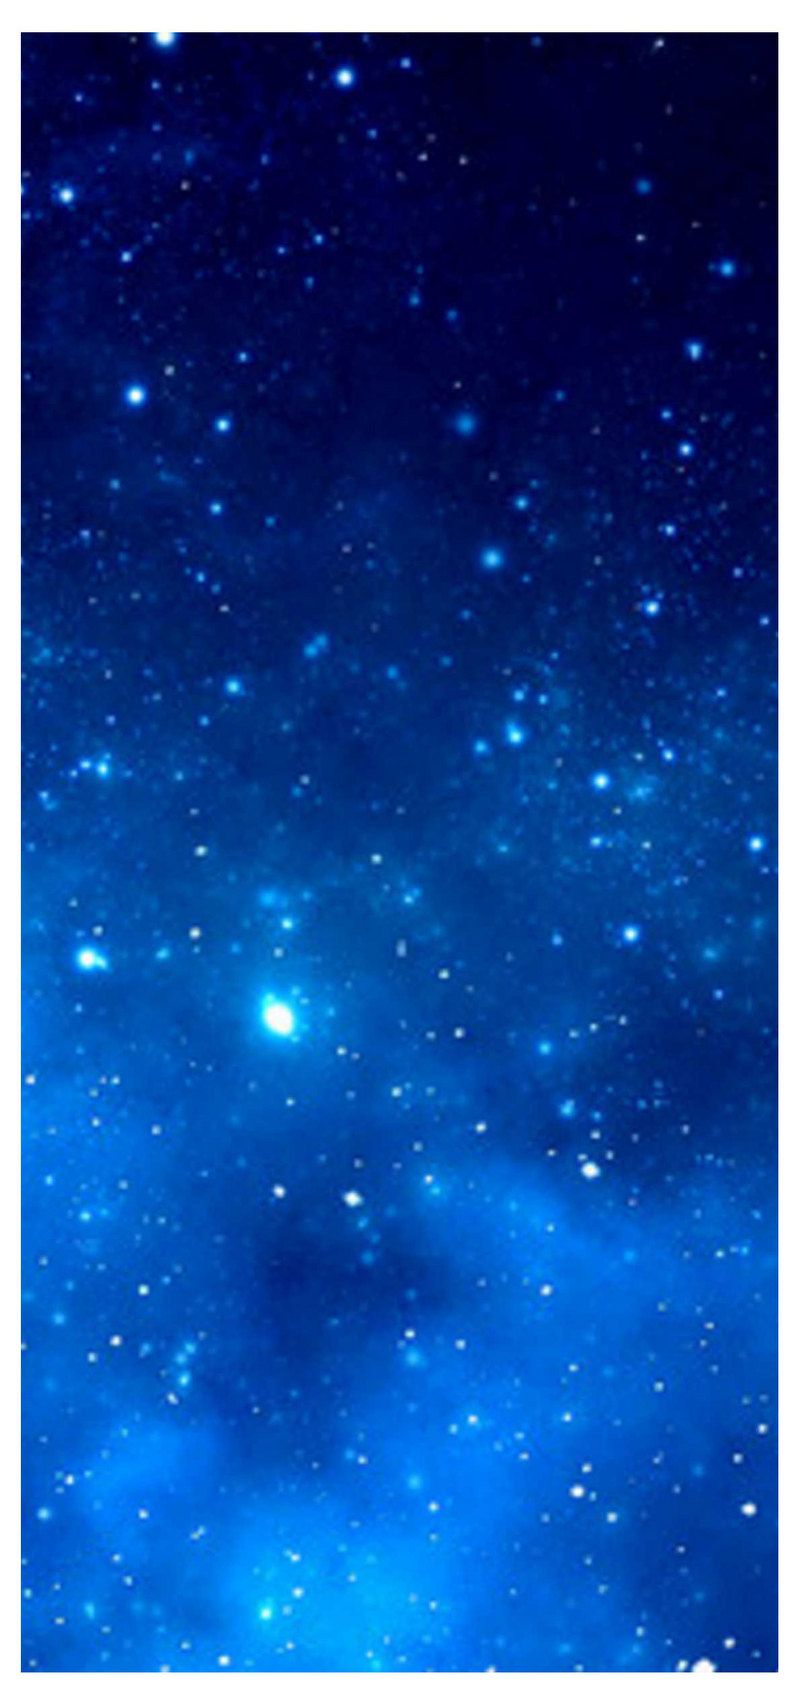 blue night sky mobile wallpaper background image free download